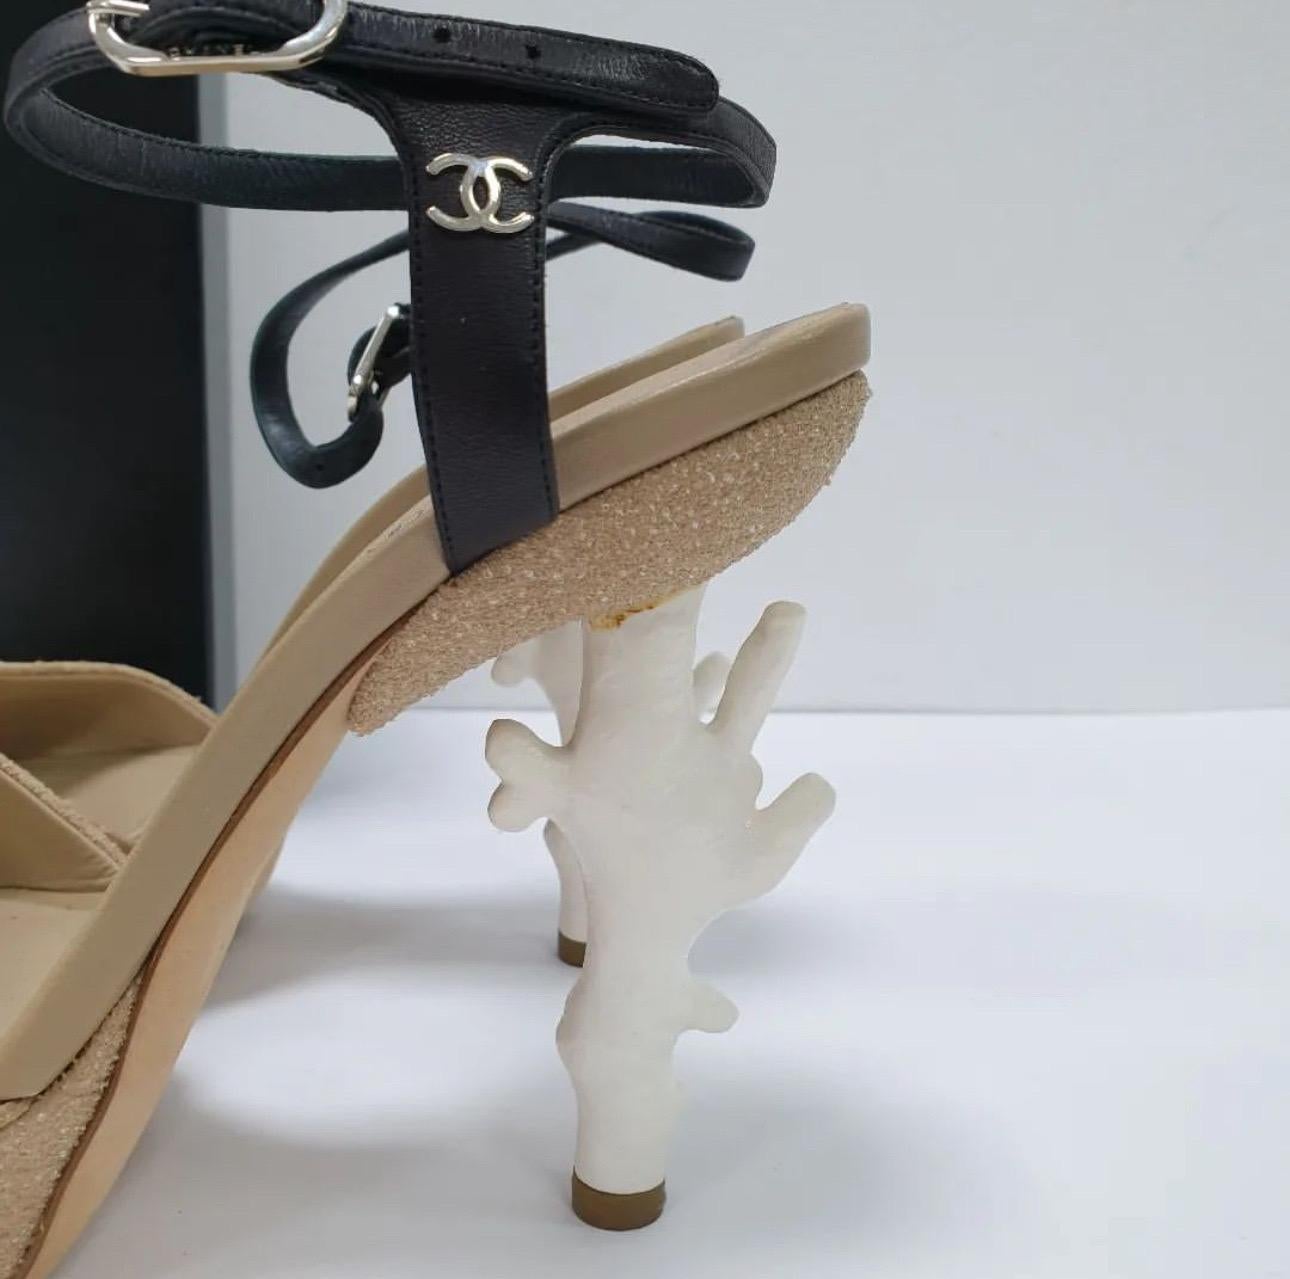 Authentic Chanel fantasy beige “sand” textured platform heeled sandals with white coral branch heels and black leather ankle strap.
 Extremely rare from the 2012 Spring/Summer collection. 
Size 37 with a 1.25” platform and 5” total heel height.
Very